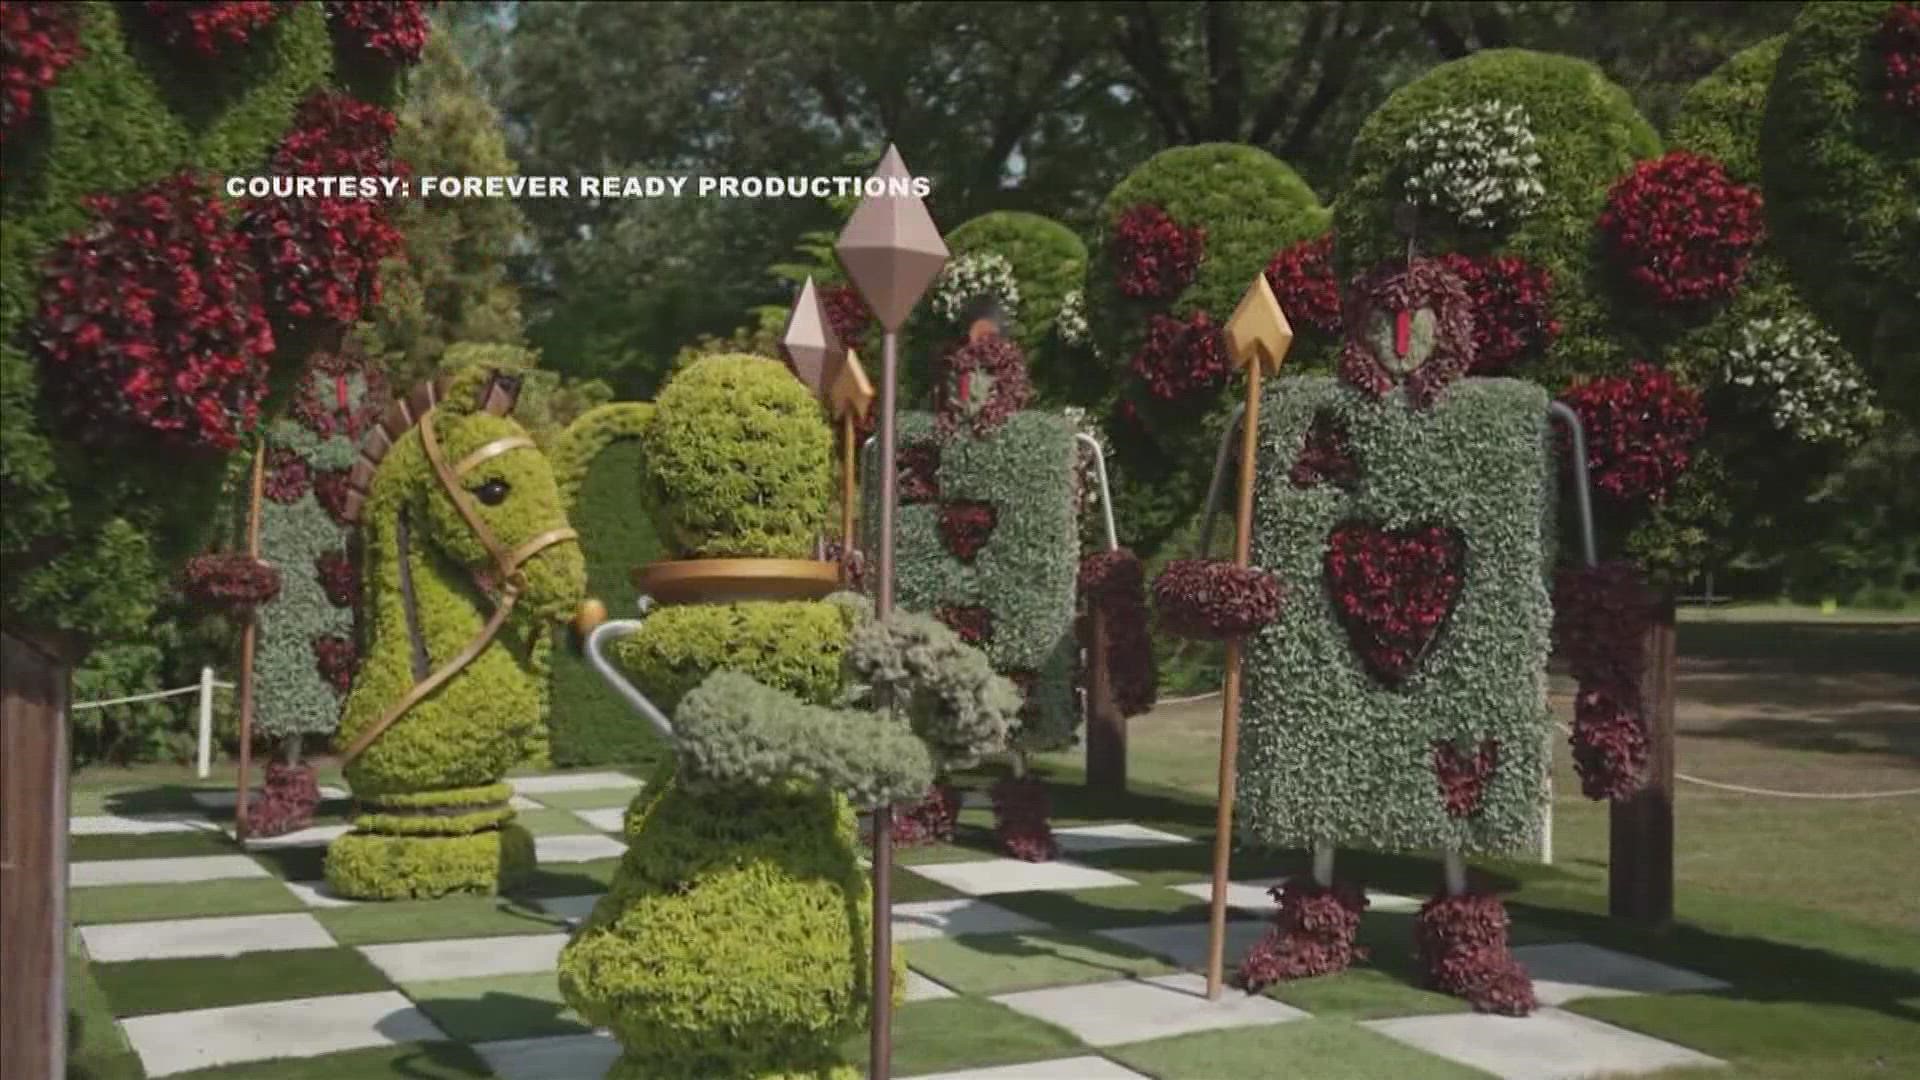 Alice in Wonderland comes to life in the new exhibit at the Memphis Botanic Garden this summer.